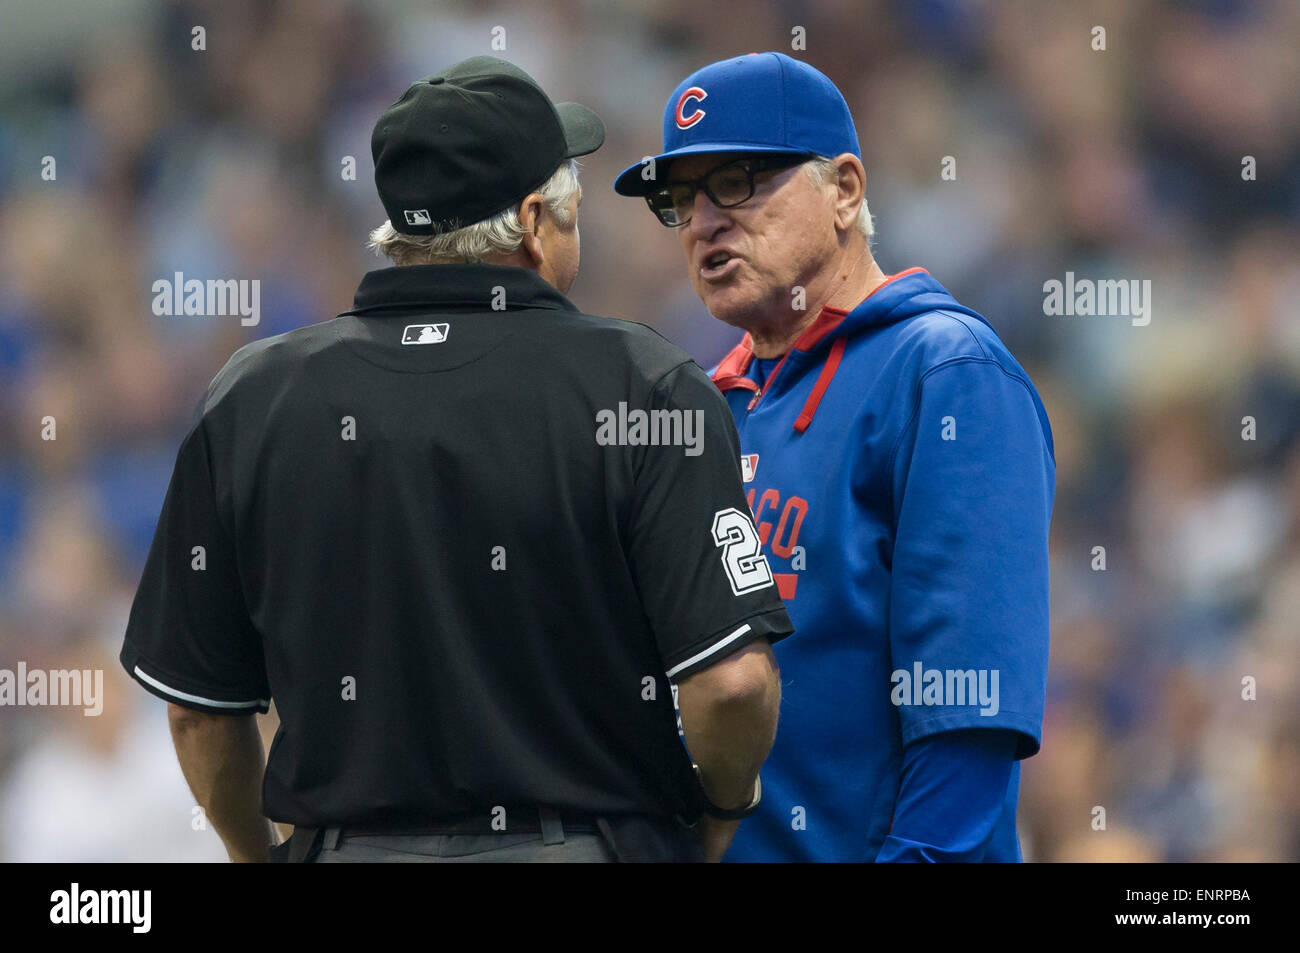 Milwaukee, WI, USA. 9th May, 2015. Chicago Cubs manager Joe Maddon #70 talks with home plate umpire Tom Hallion about a trapped ball under the center field fence during the Major League Baseball game between the Milwaukee Brewers and the Chicago Cubs at Miller Park in Milwaukee, WI. John Fisher/CSM/Alamy Live News Stock Photo